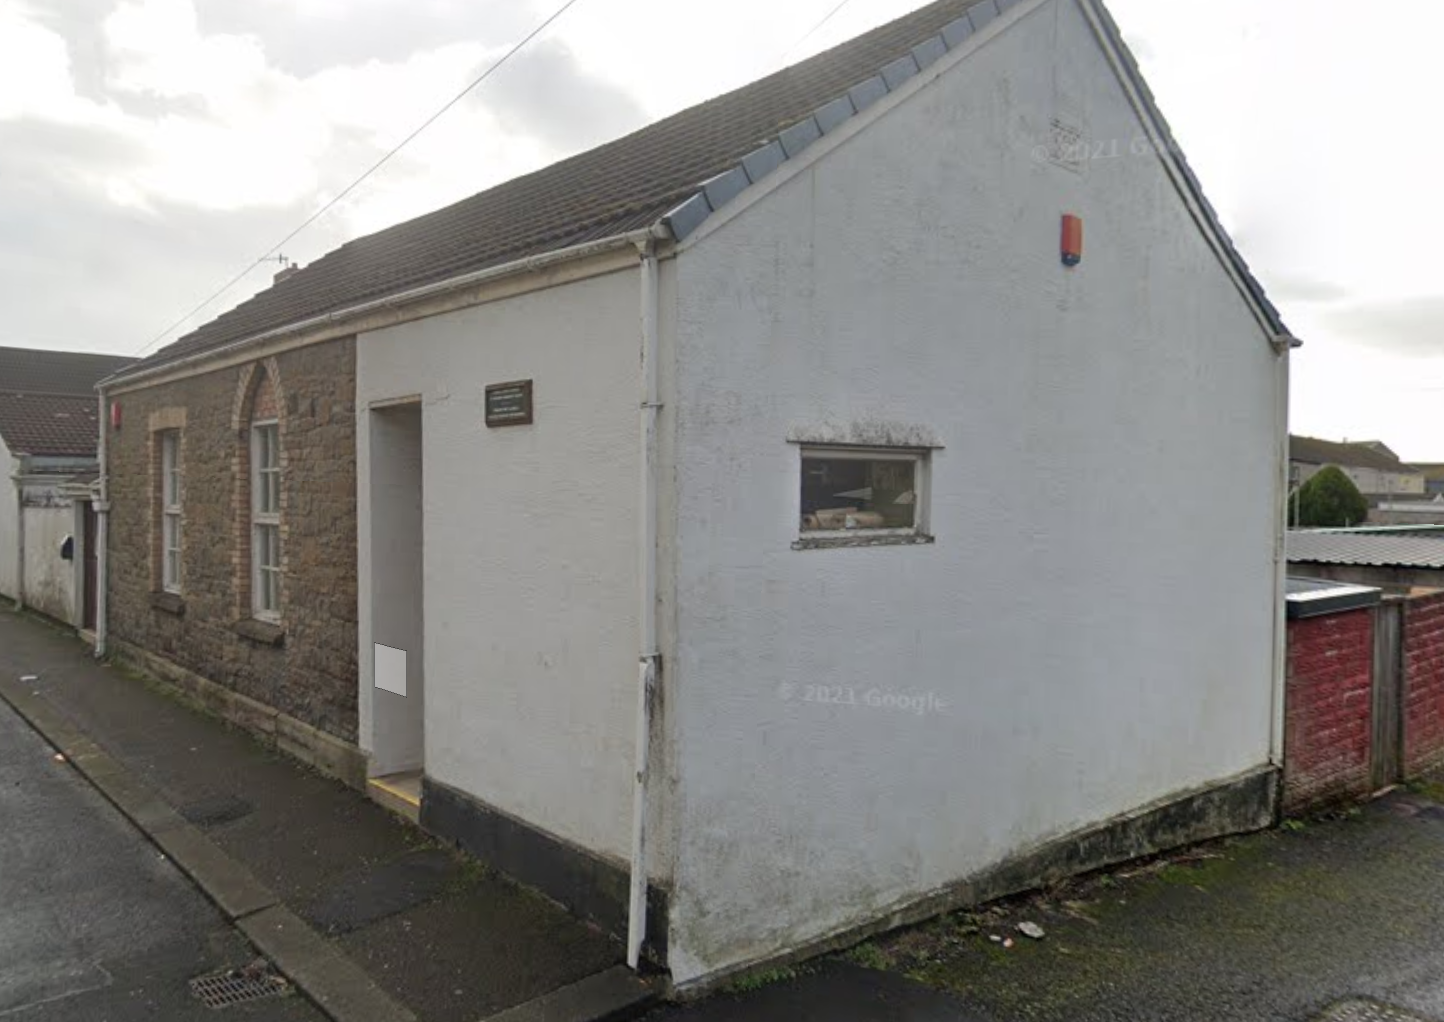 Llanelli Town Council plan not to renew lease of St Barnabas Community Centre